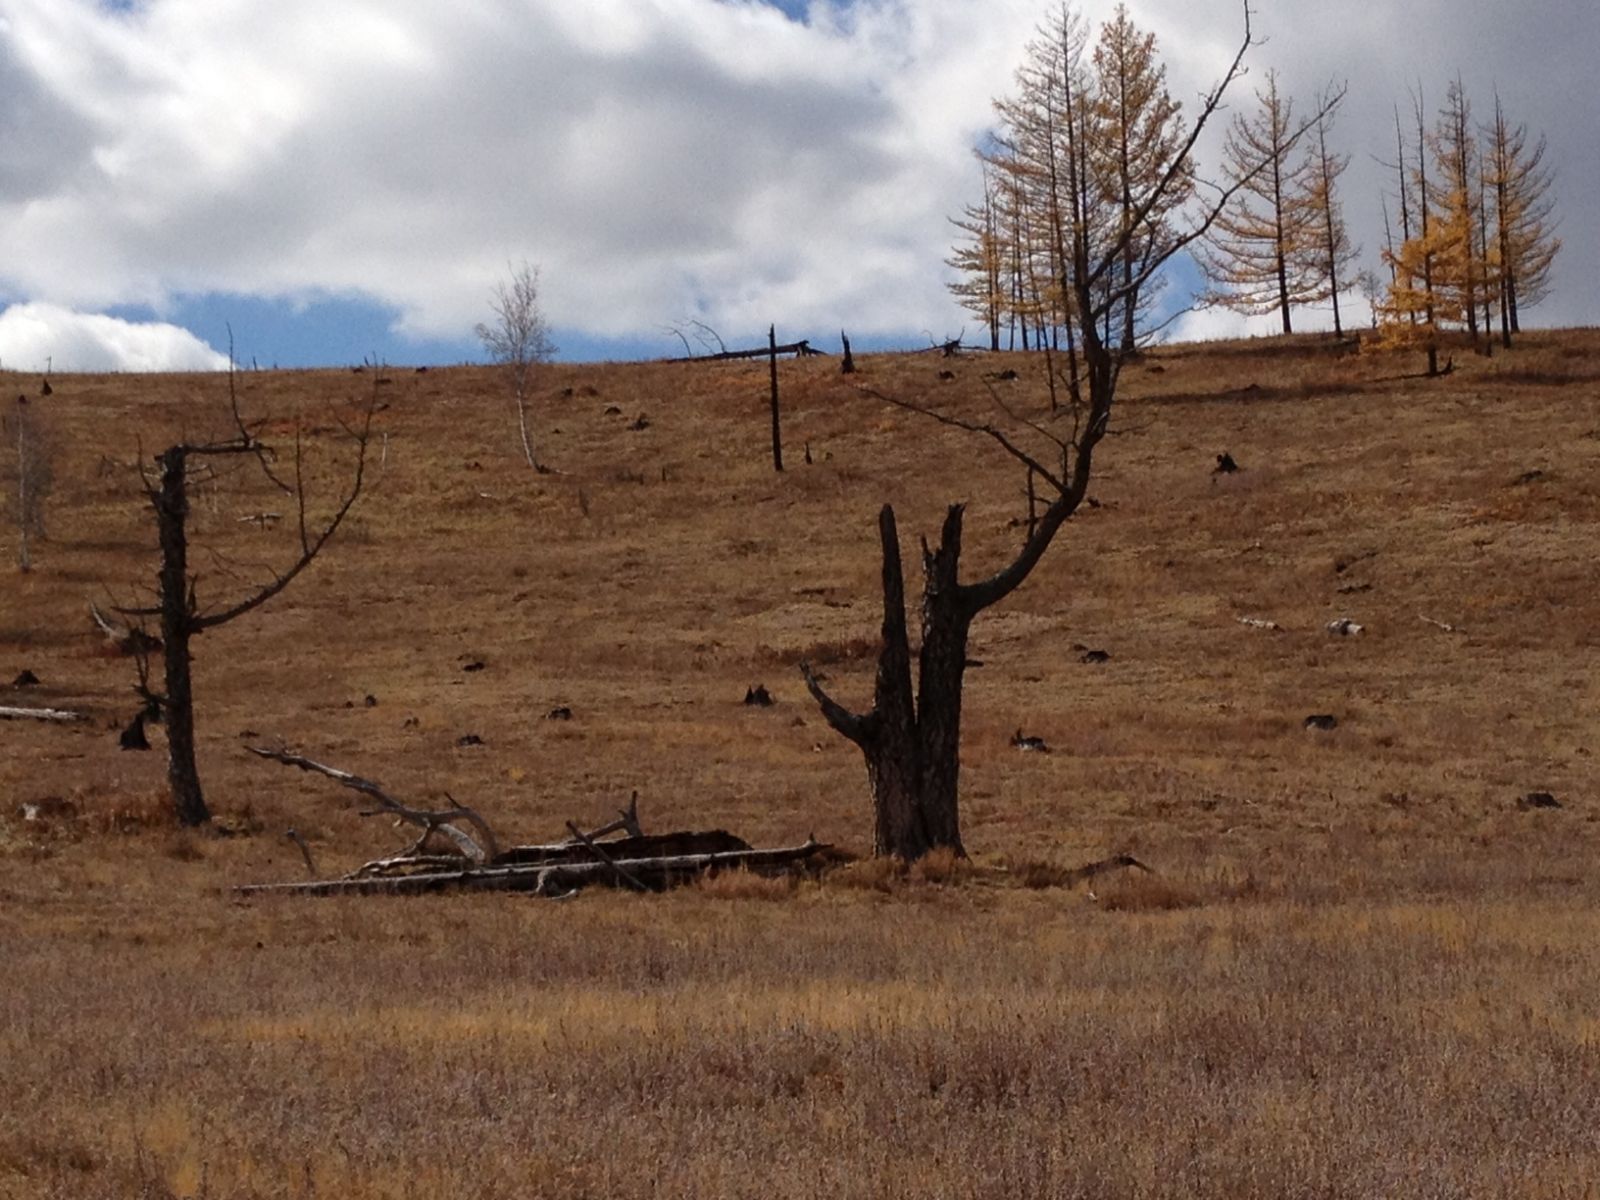 Destroyed trees at Tuul River Valley